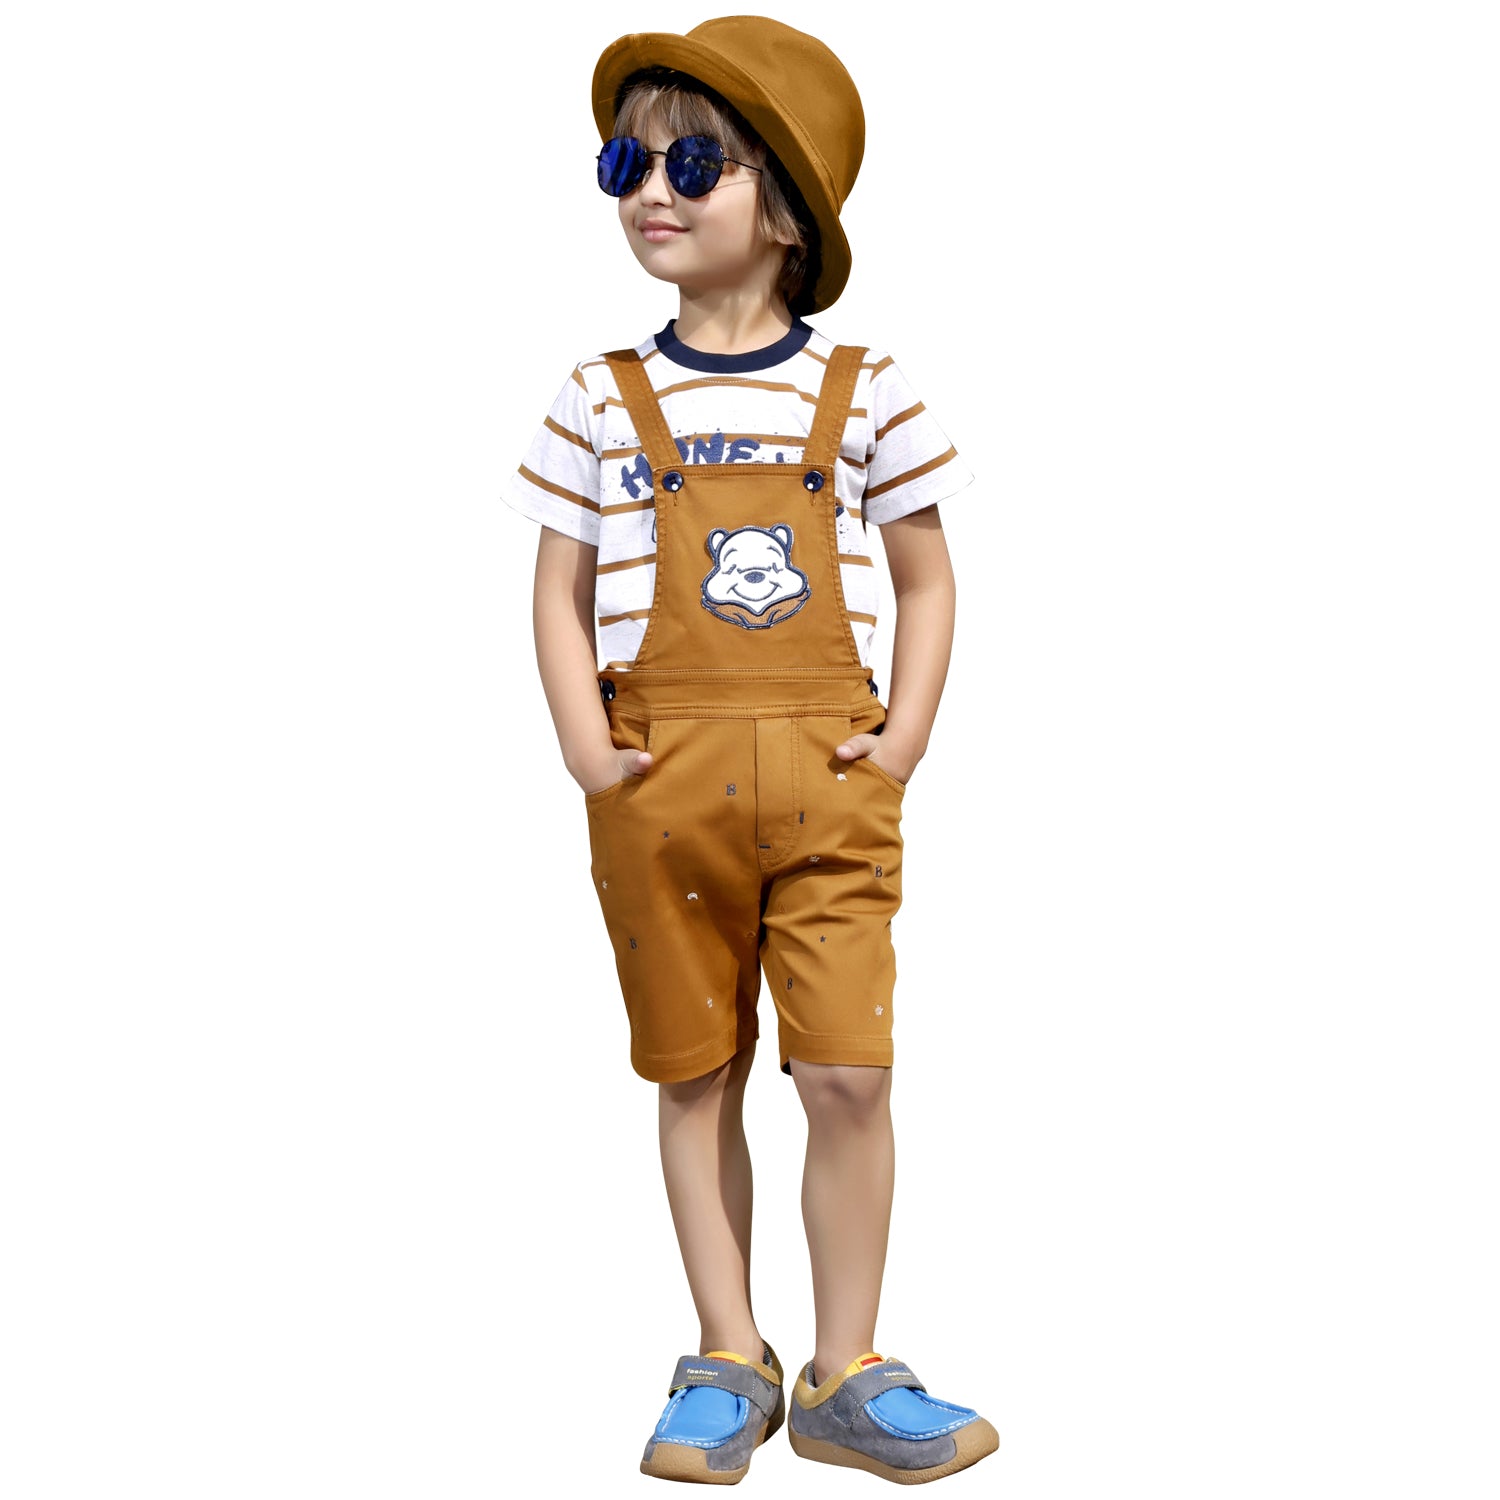 Bad Boys Party wear Outfit with T-shirt and Dungaree Shorts - mashup boys